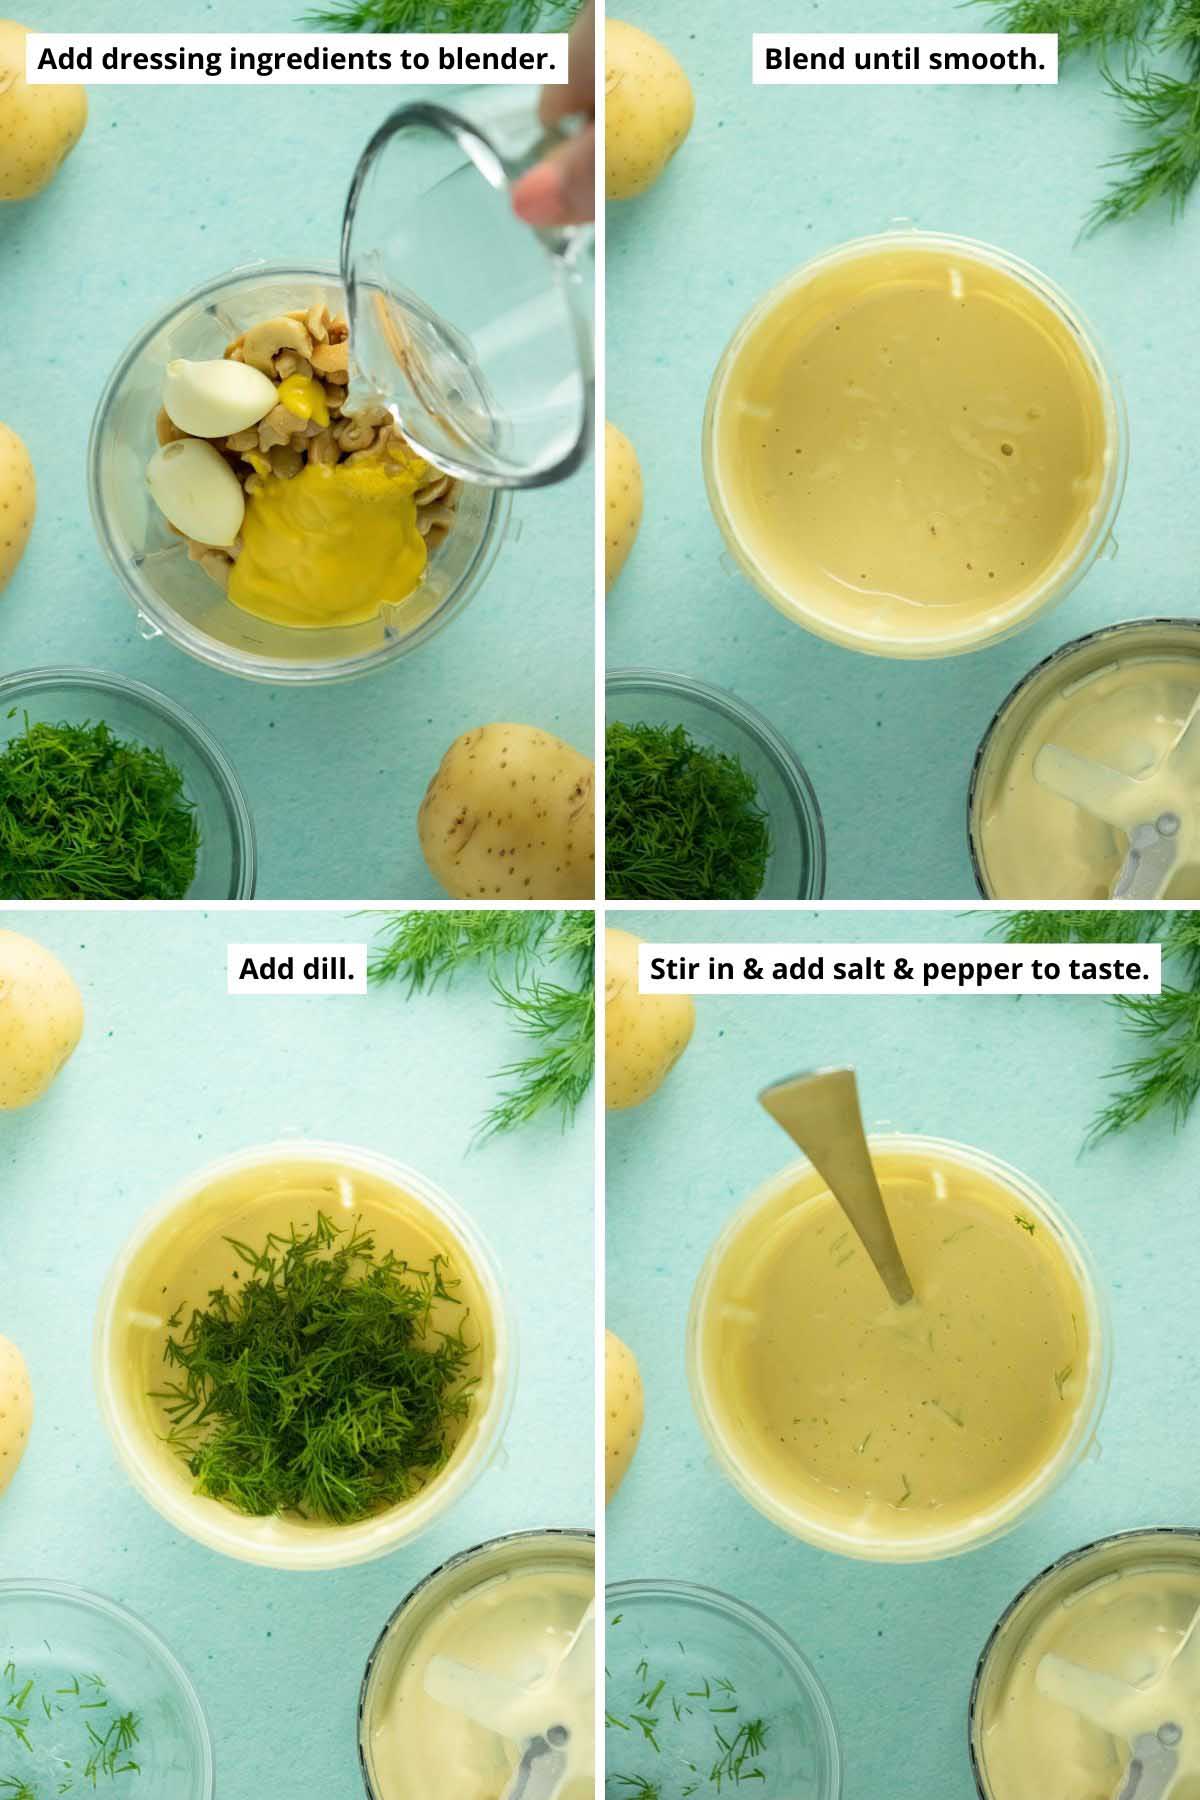 image collage showing cashew dressing ingredients before and after blending, adding the dill to the dressing, and the dressing after stirring in the dill